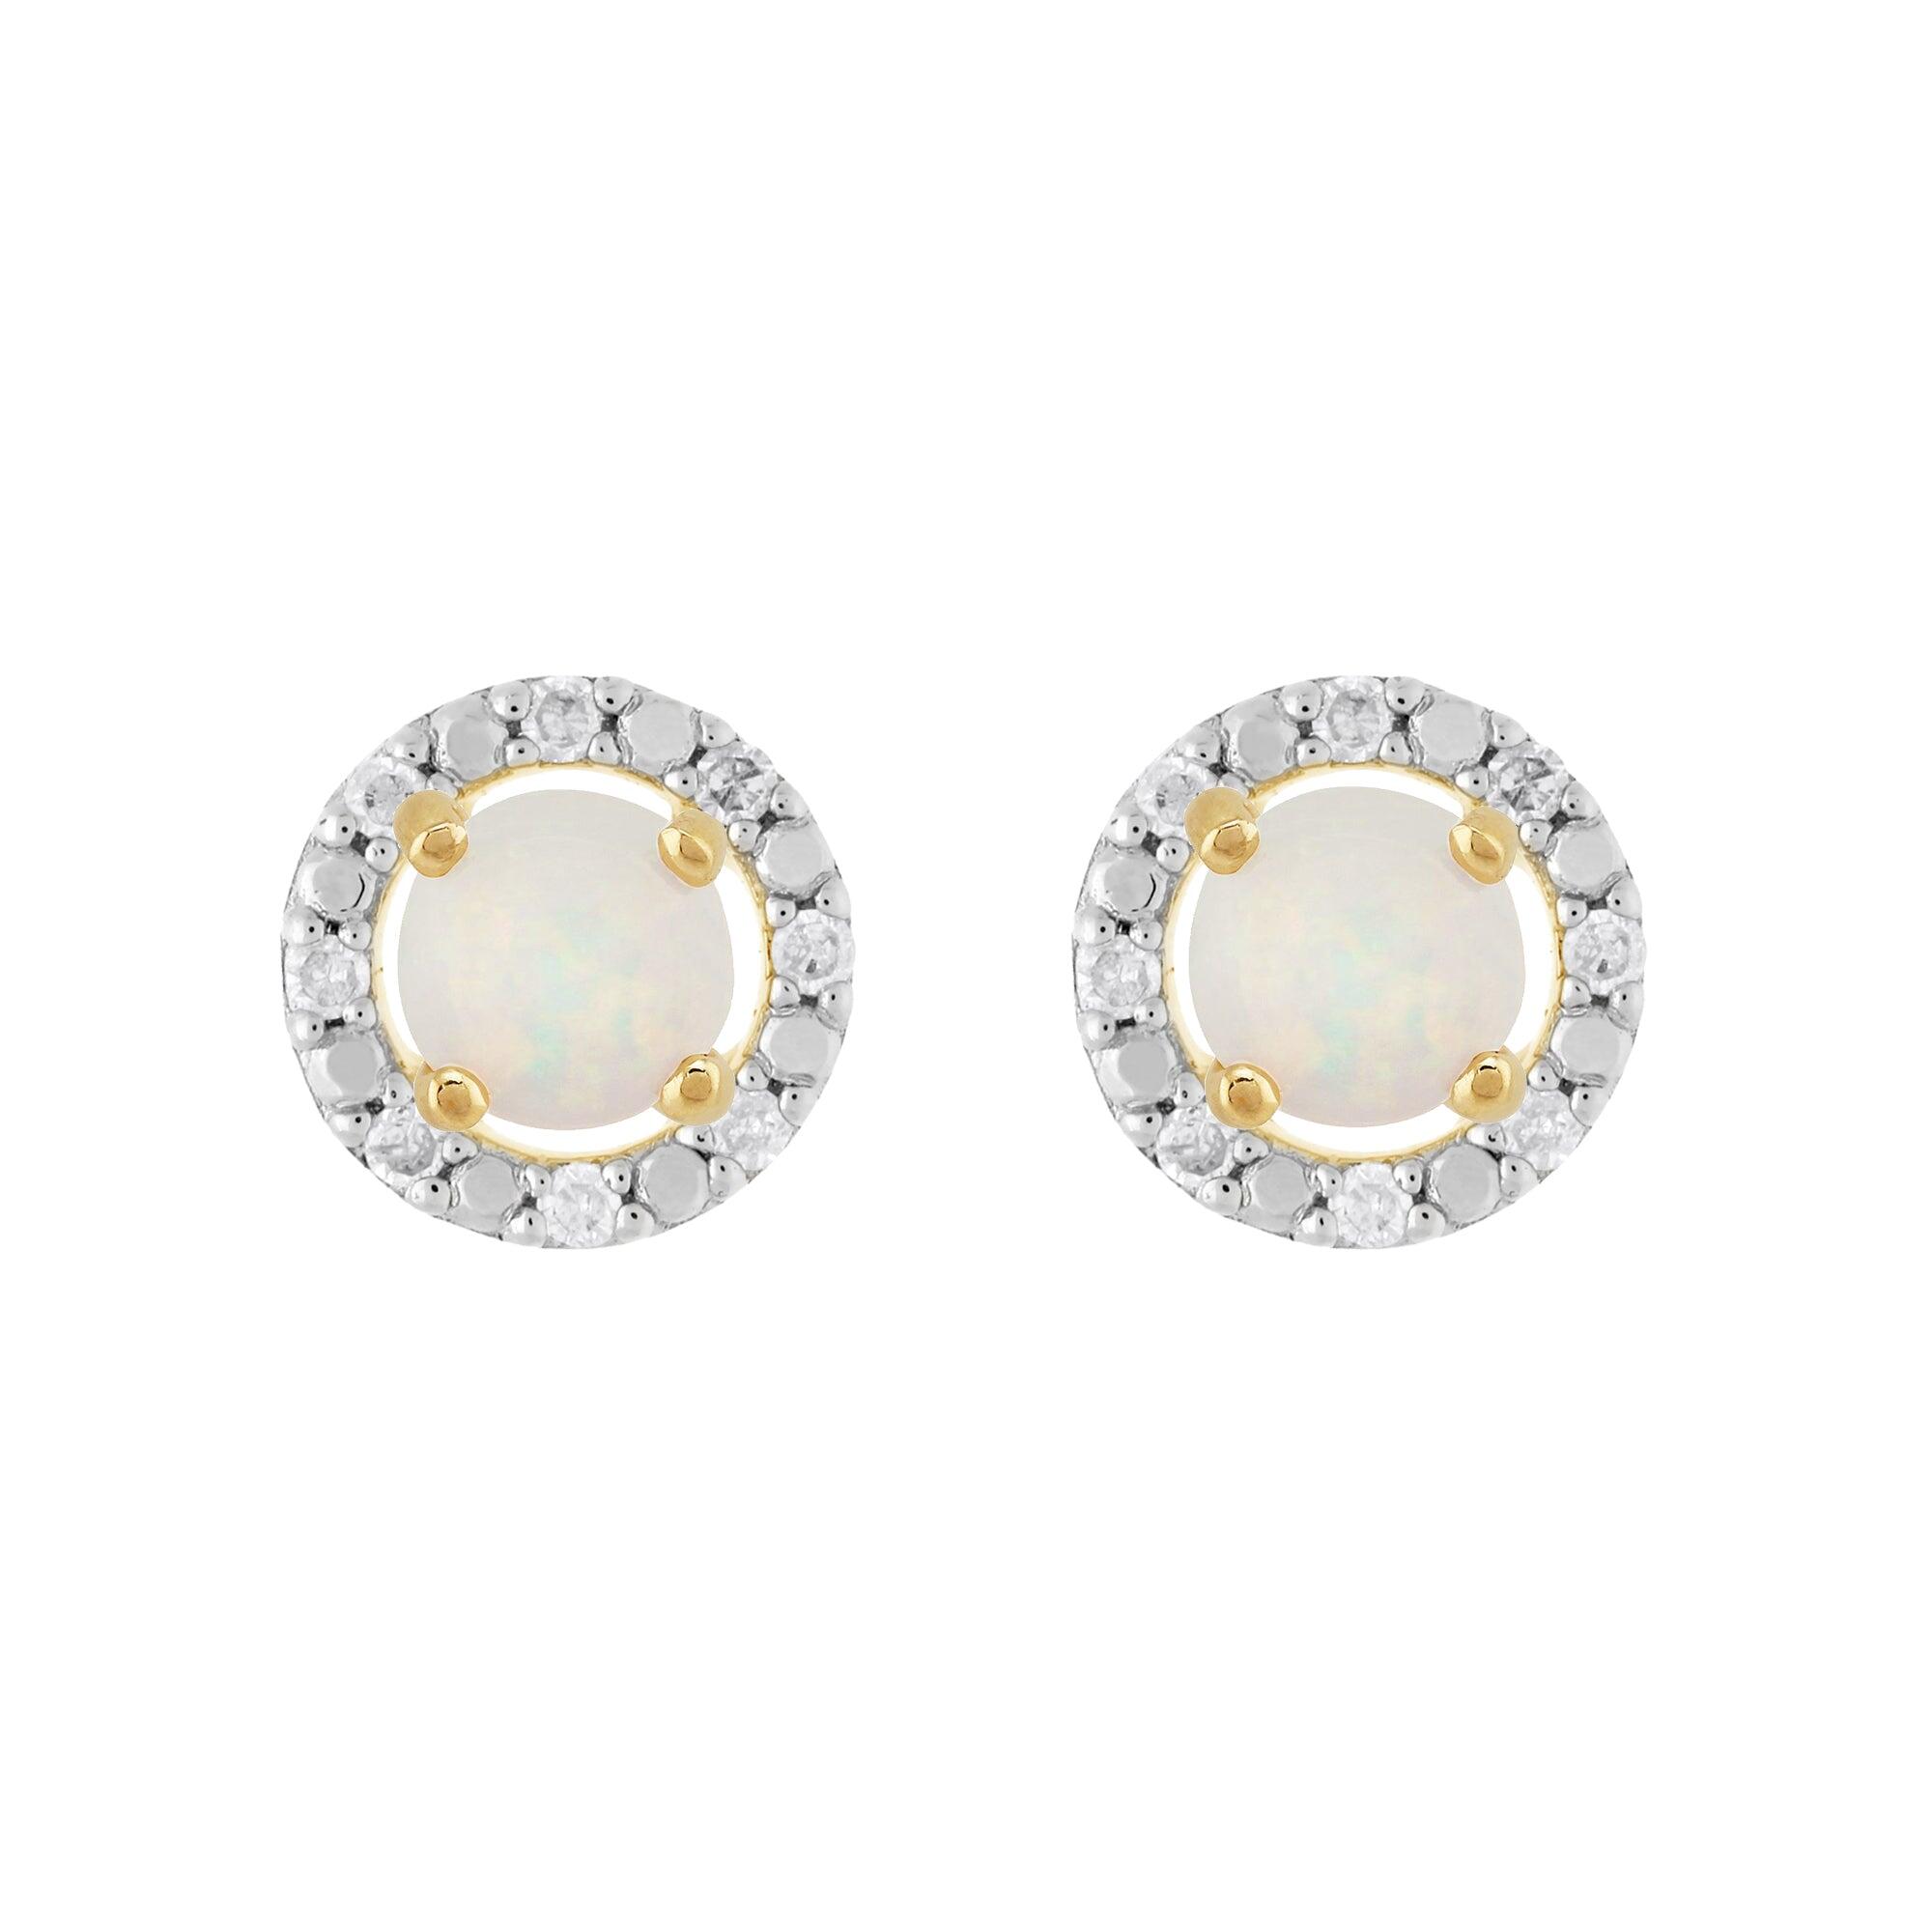 Classic Round Opal Stud Earrings with Detachable Diamond Round Earrings Jacket Set in 9ct Yellow Gold